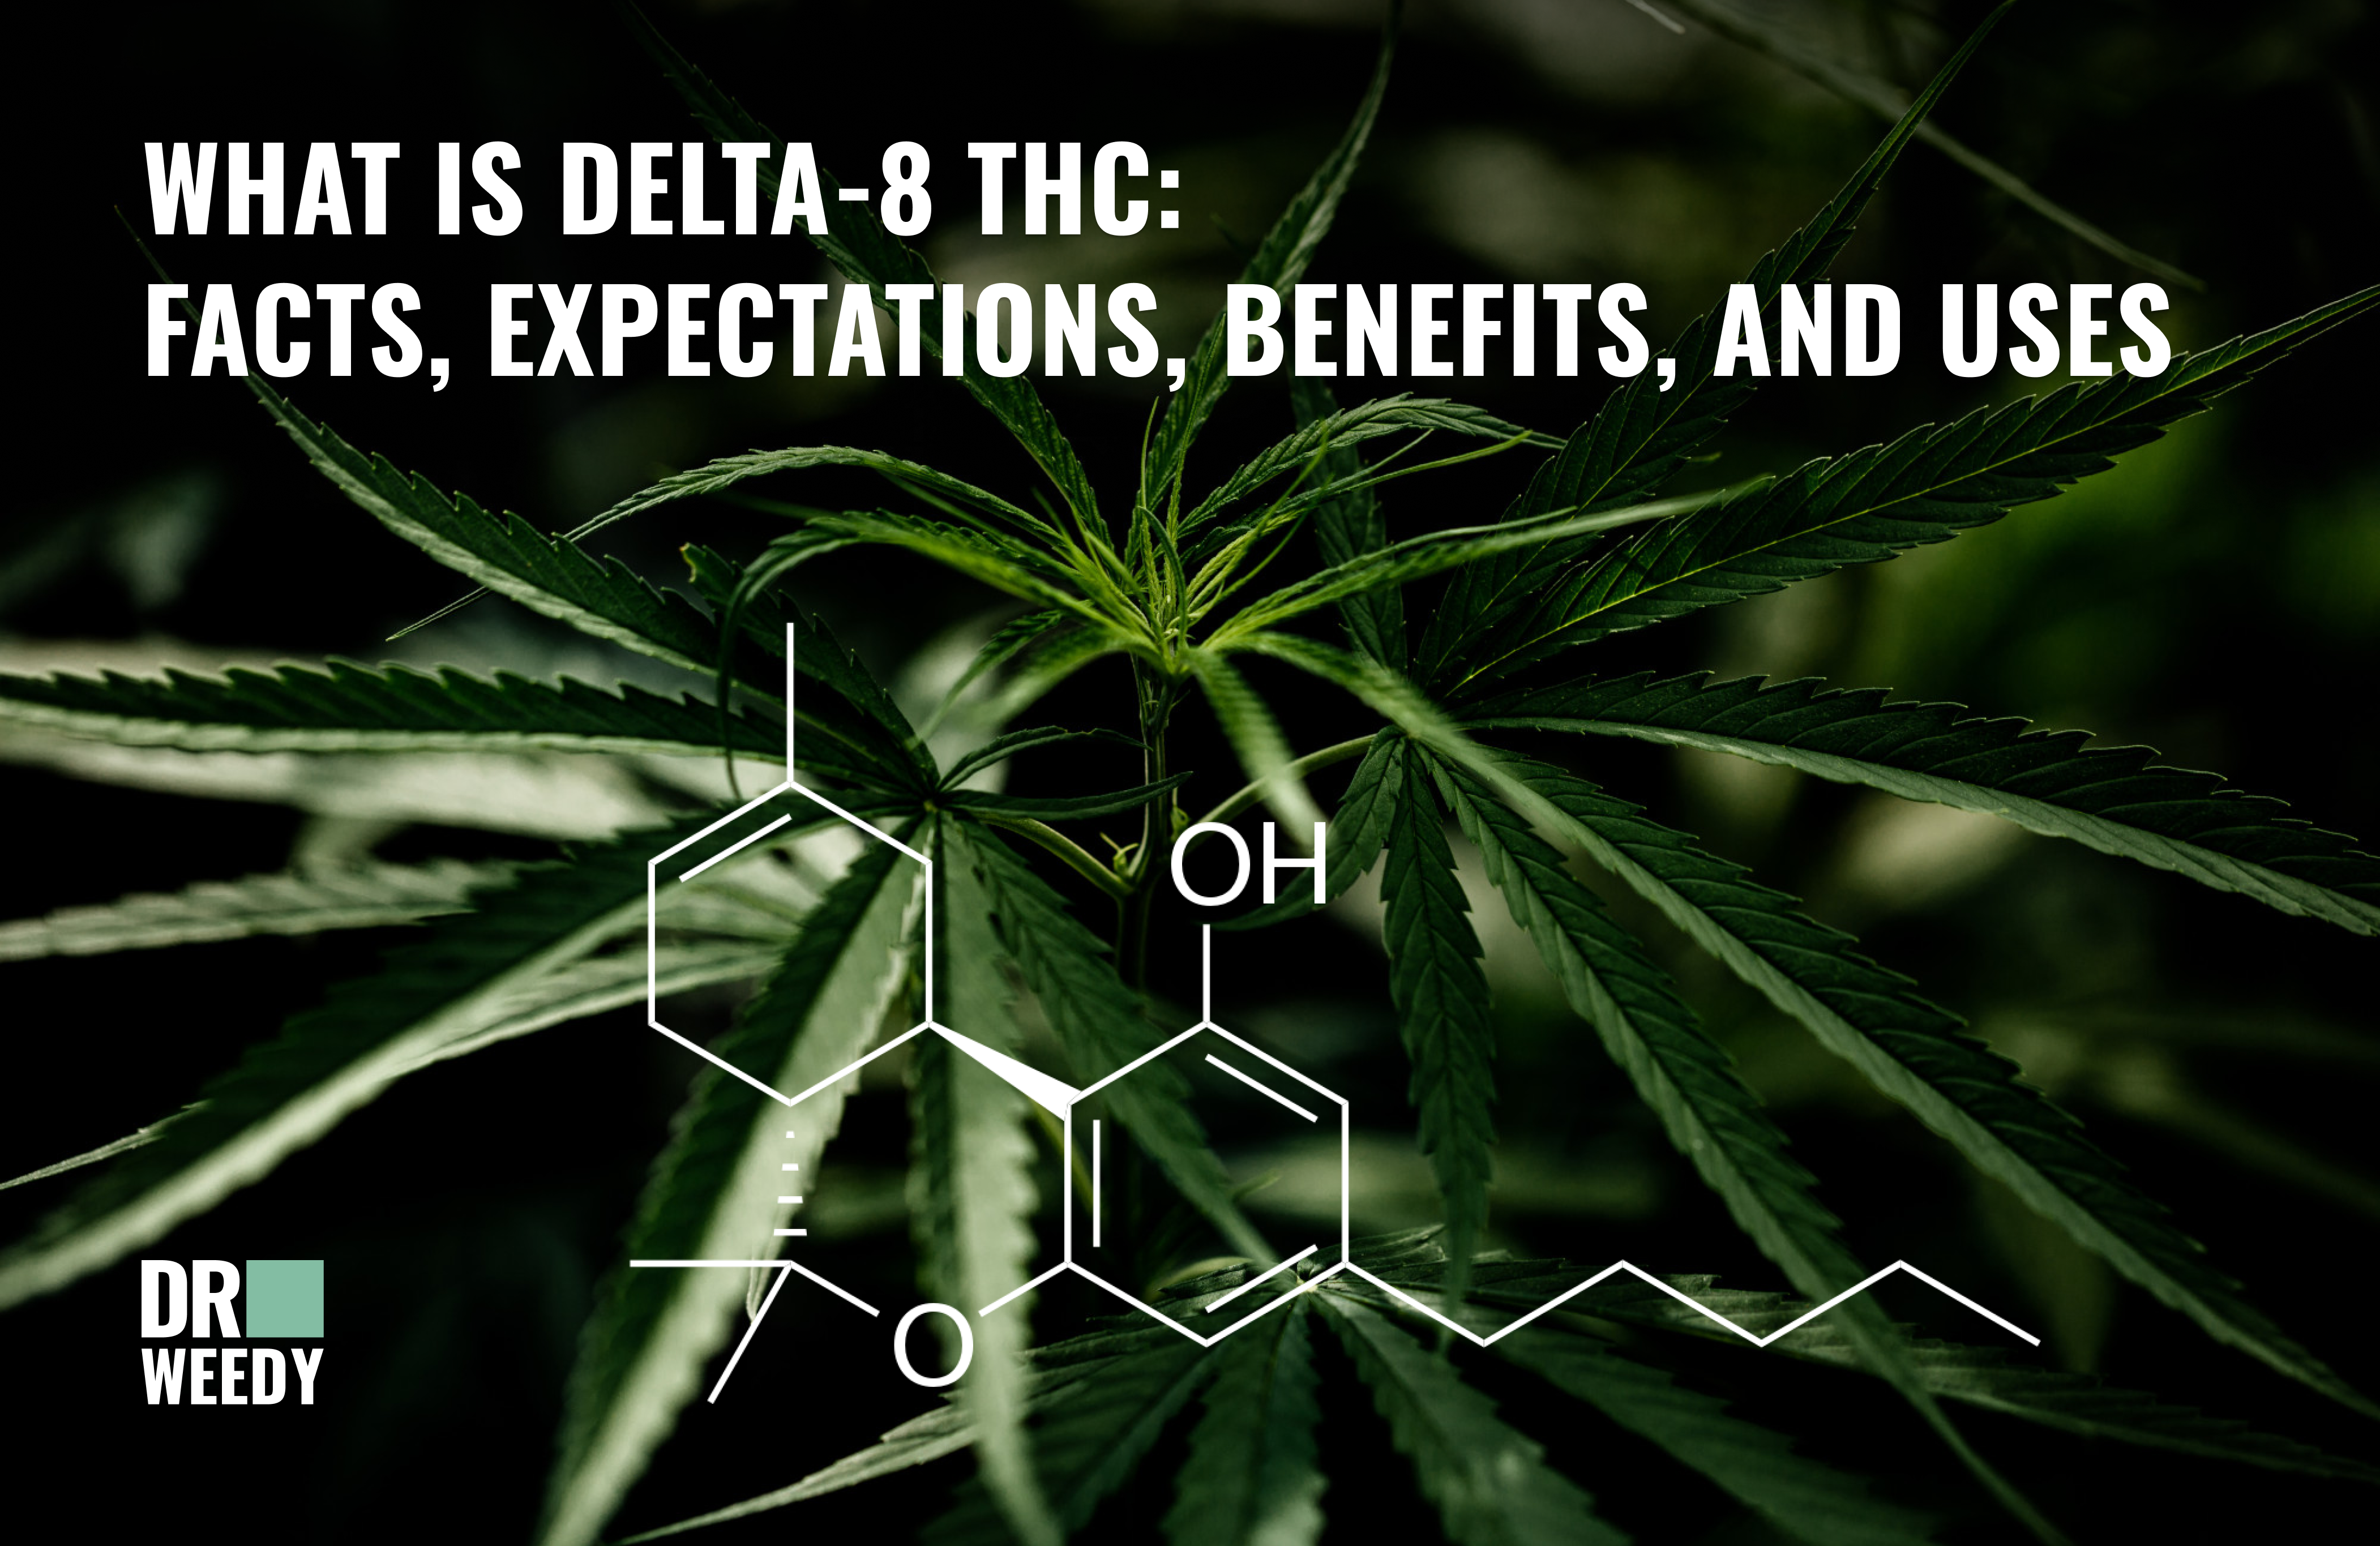 What is Delta-8 THC: Facts, Expectations, Benefits, and Uses